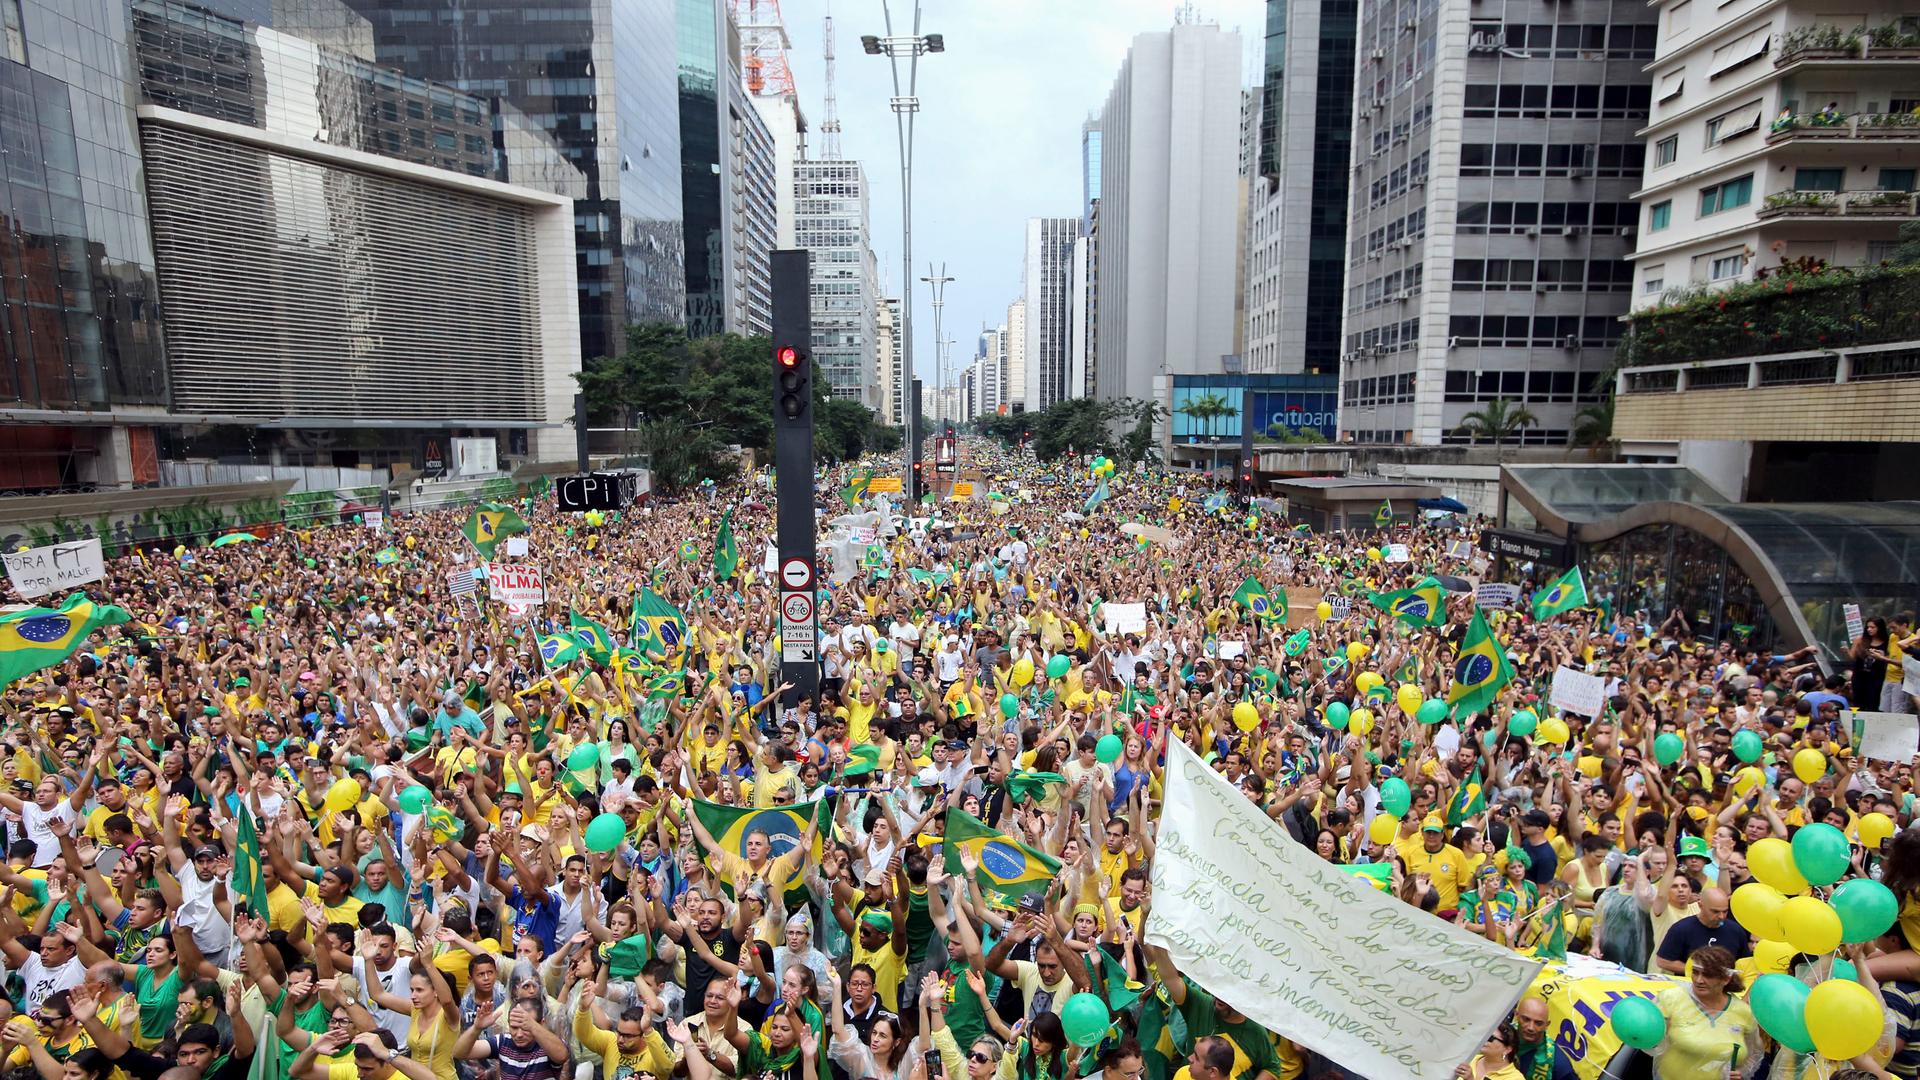 Demonstrators attend a protest against Brazil's President Dilma Rousseff in São Paulo on March 15, 2015. Protest organizers in dozens of cities across Brazil are planning marches to pressure Rousseff over unpopular budget cuts and a corruption scandal tha